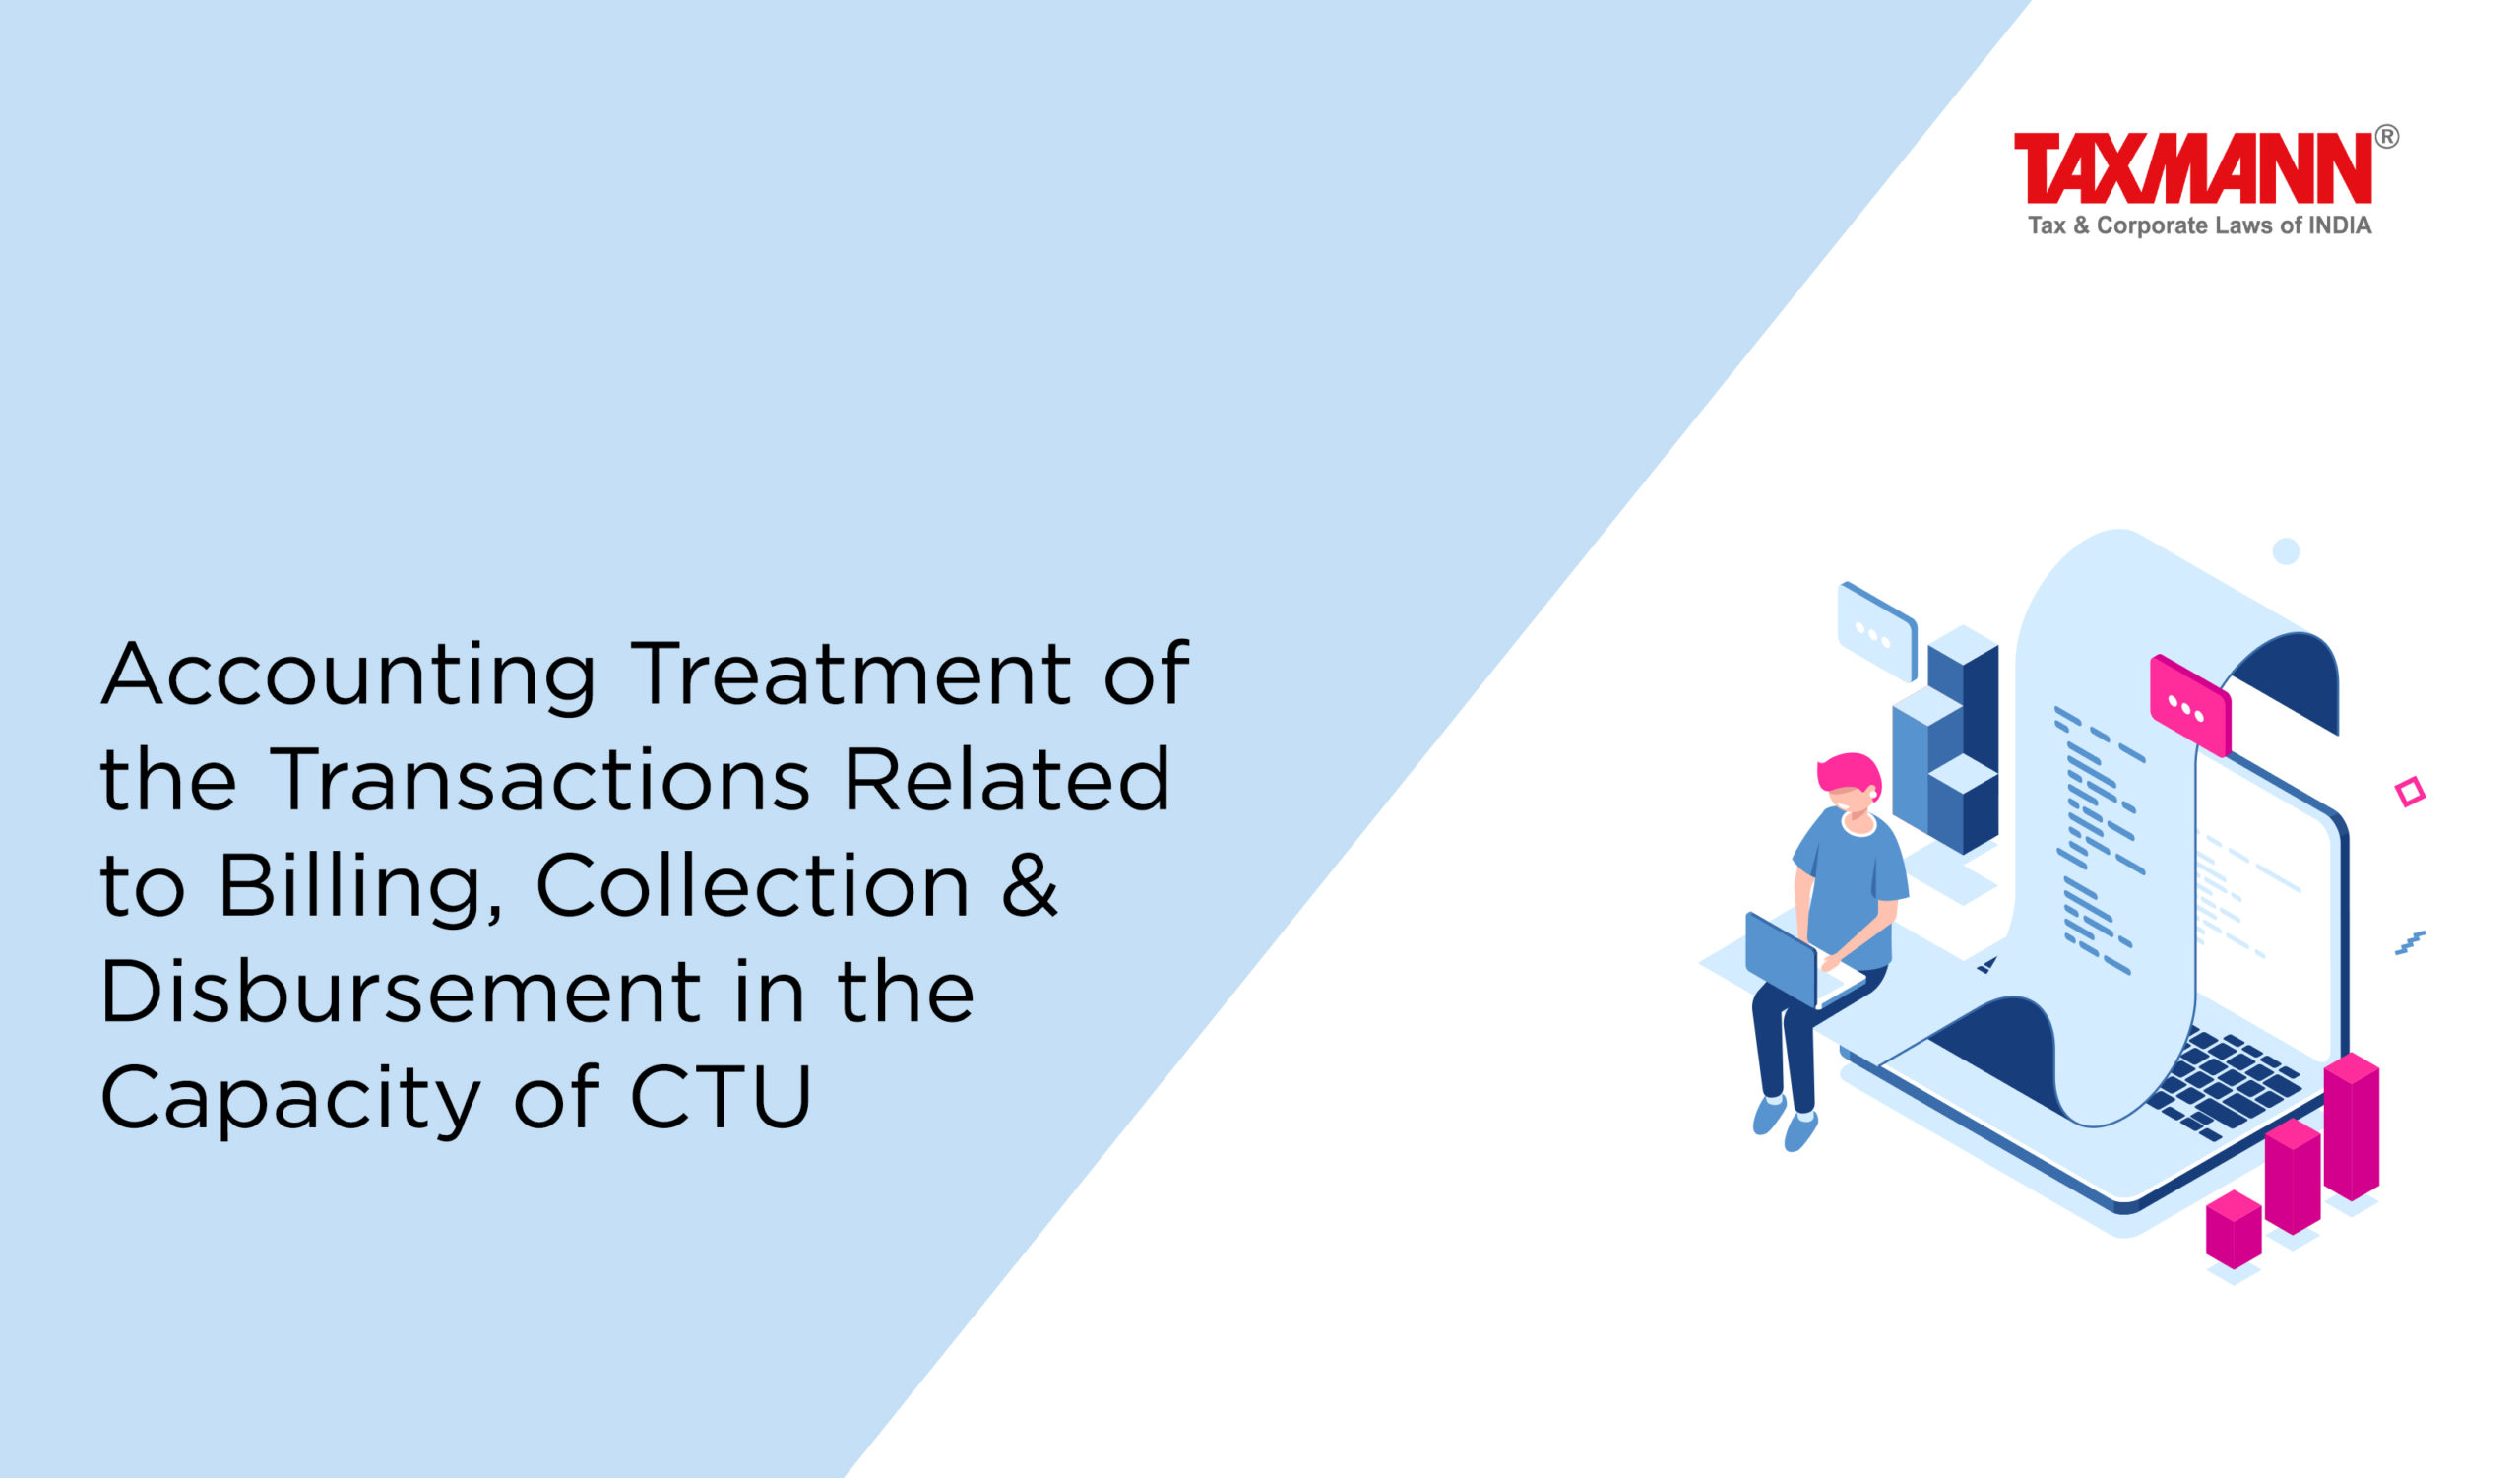 Accounting Treatment Related to Billing Collection & Disbursement